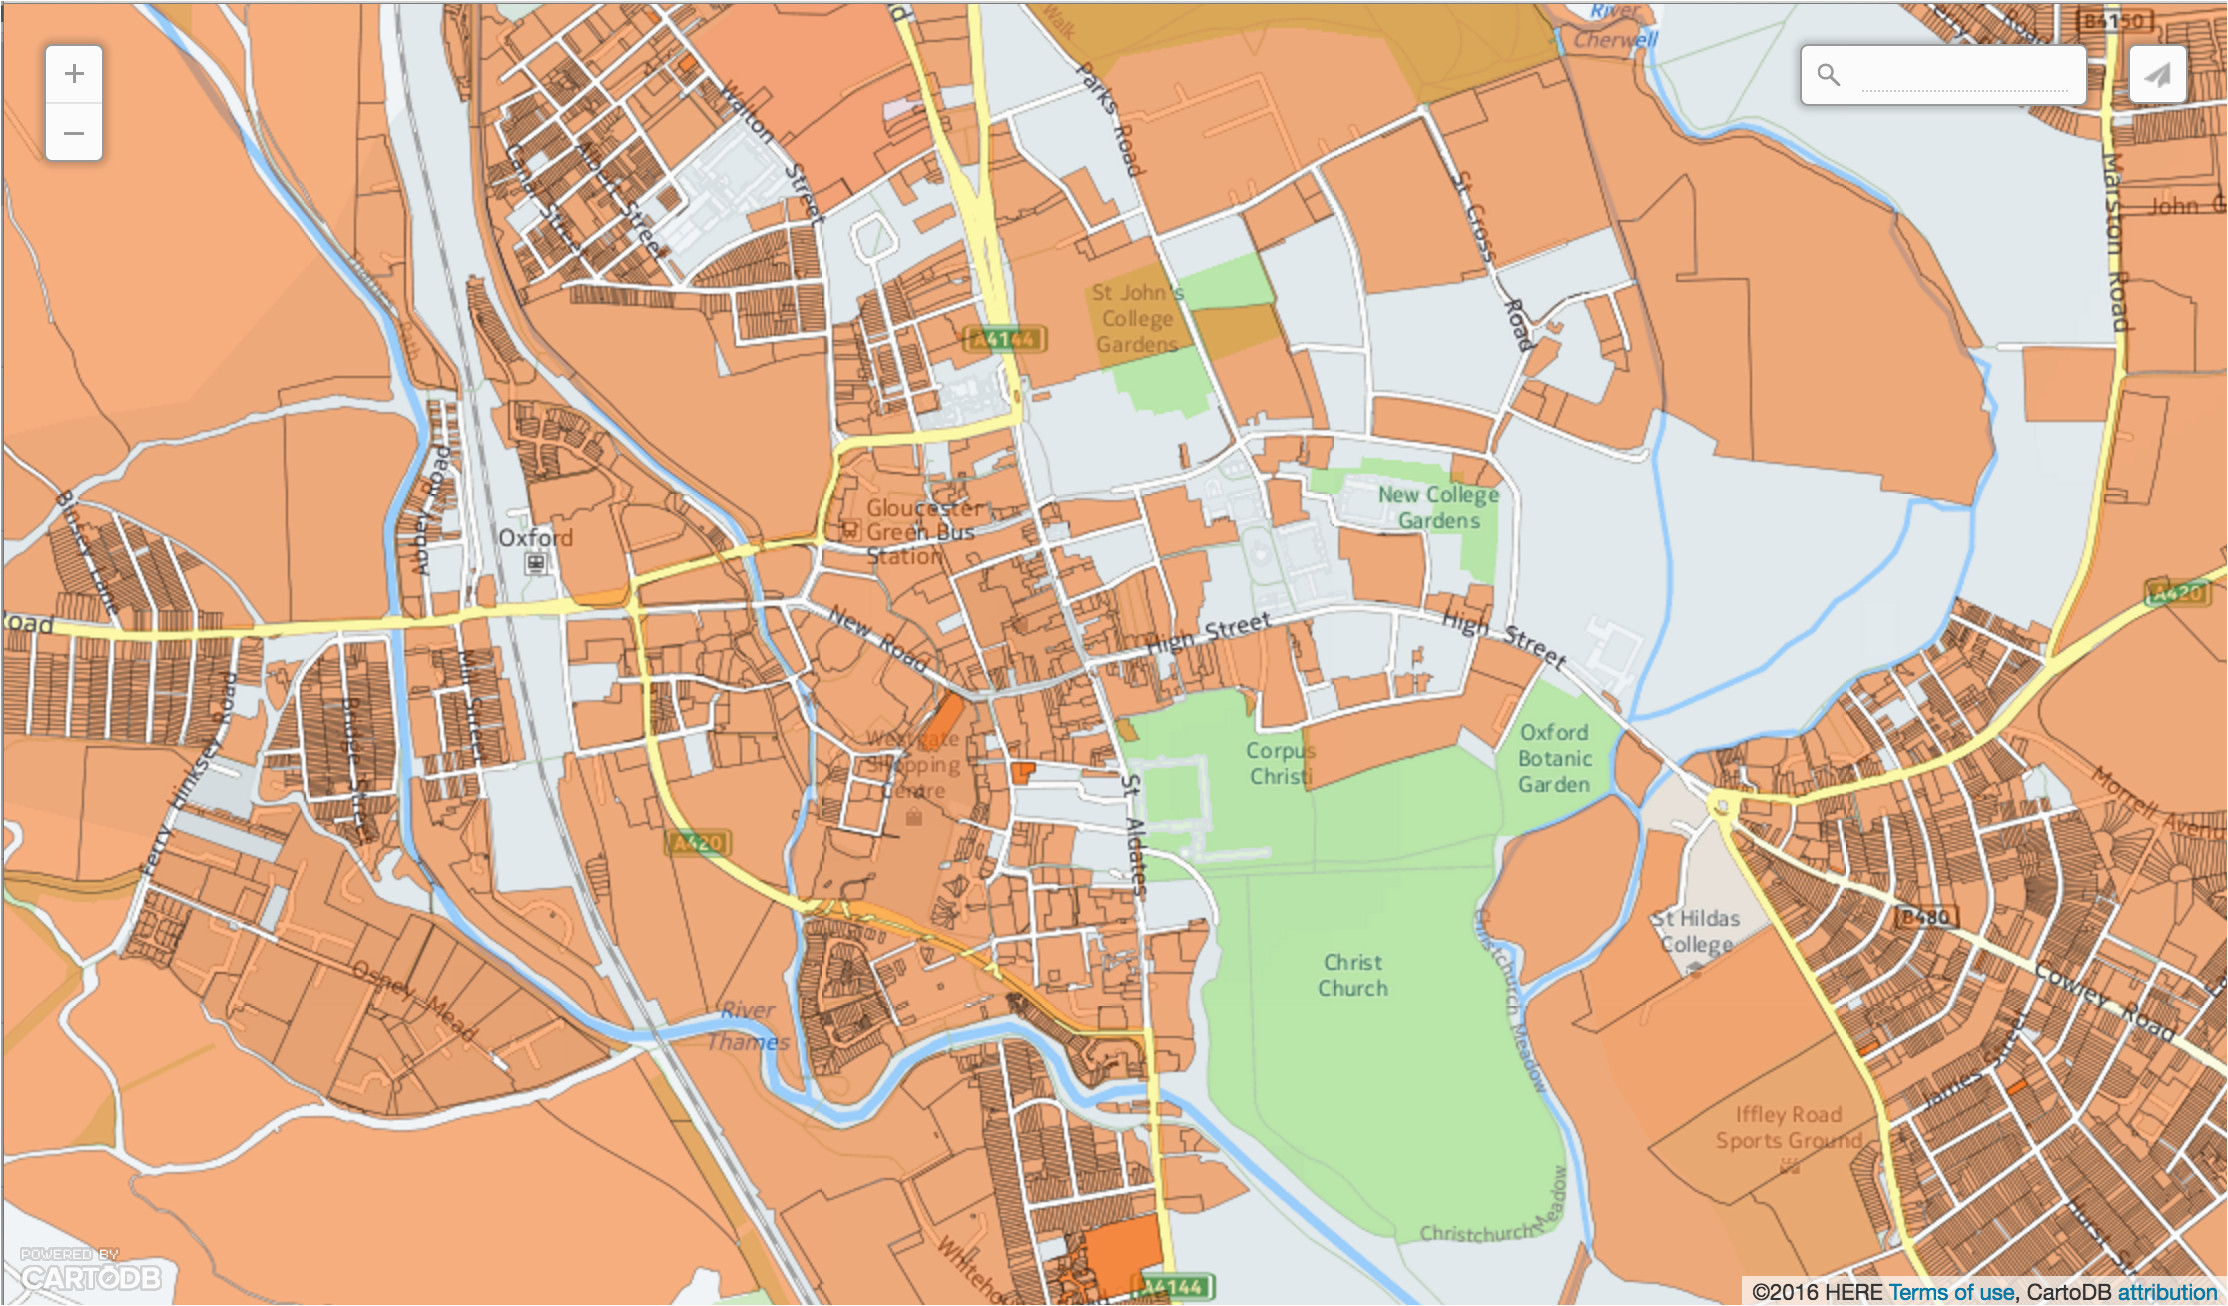 how to use land registry data to explore land ownership near you